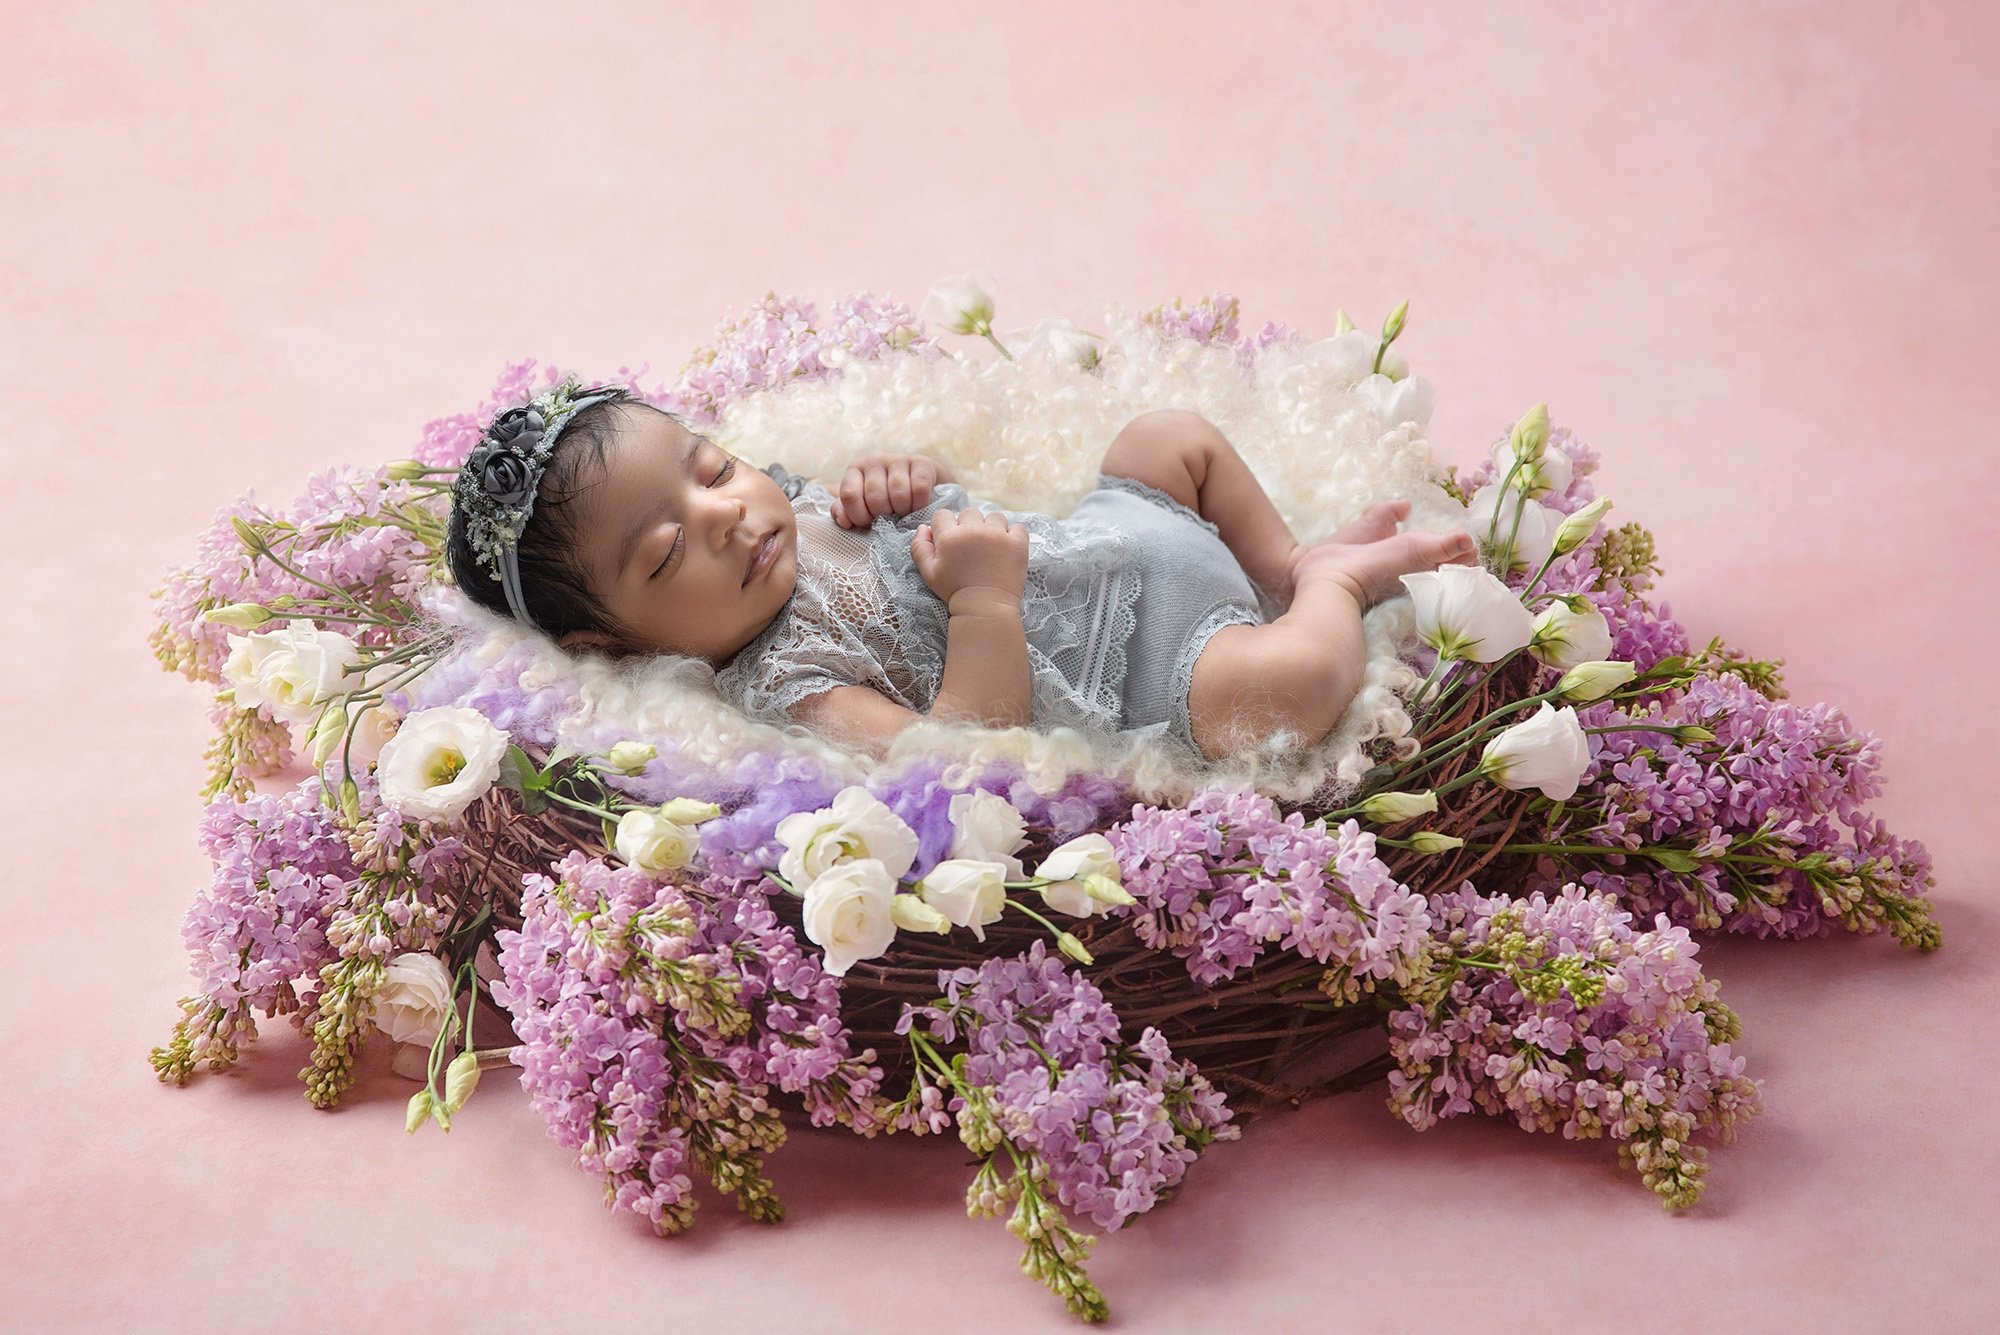 newborn baby girl in laced grey dress sound asleep on top of a purple and white floral wreath with fuzzy purple and white blankets on pink background